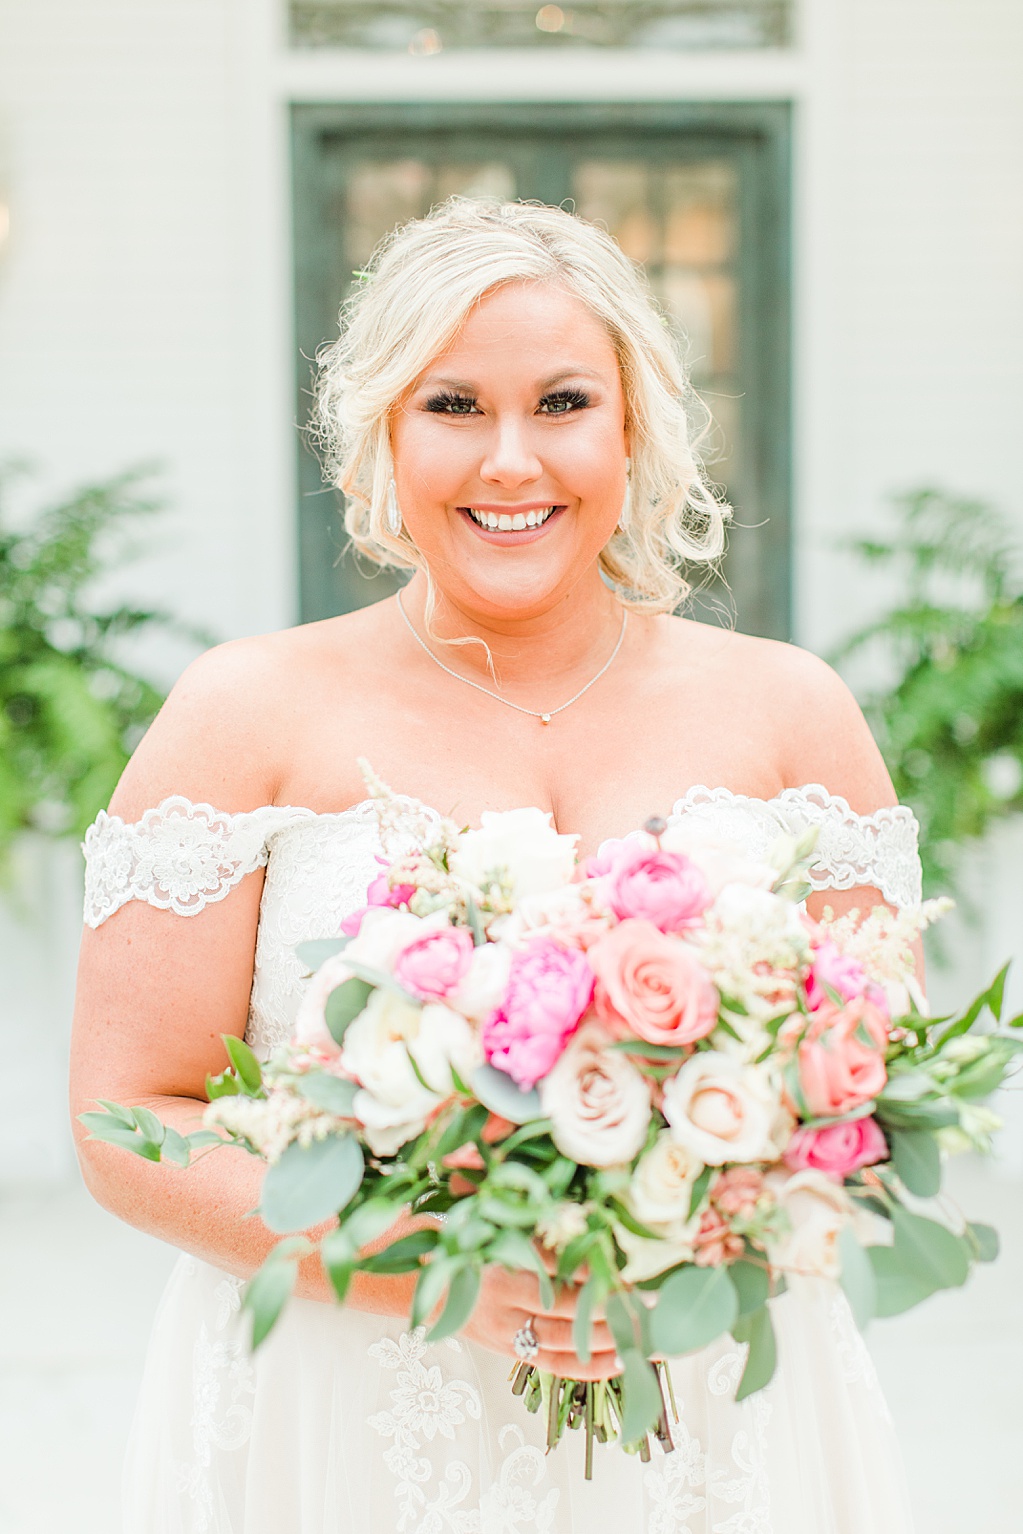 Spring Bridal Photos at The Chandelier of Gruene in New Braunfels texas 0003